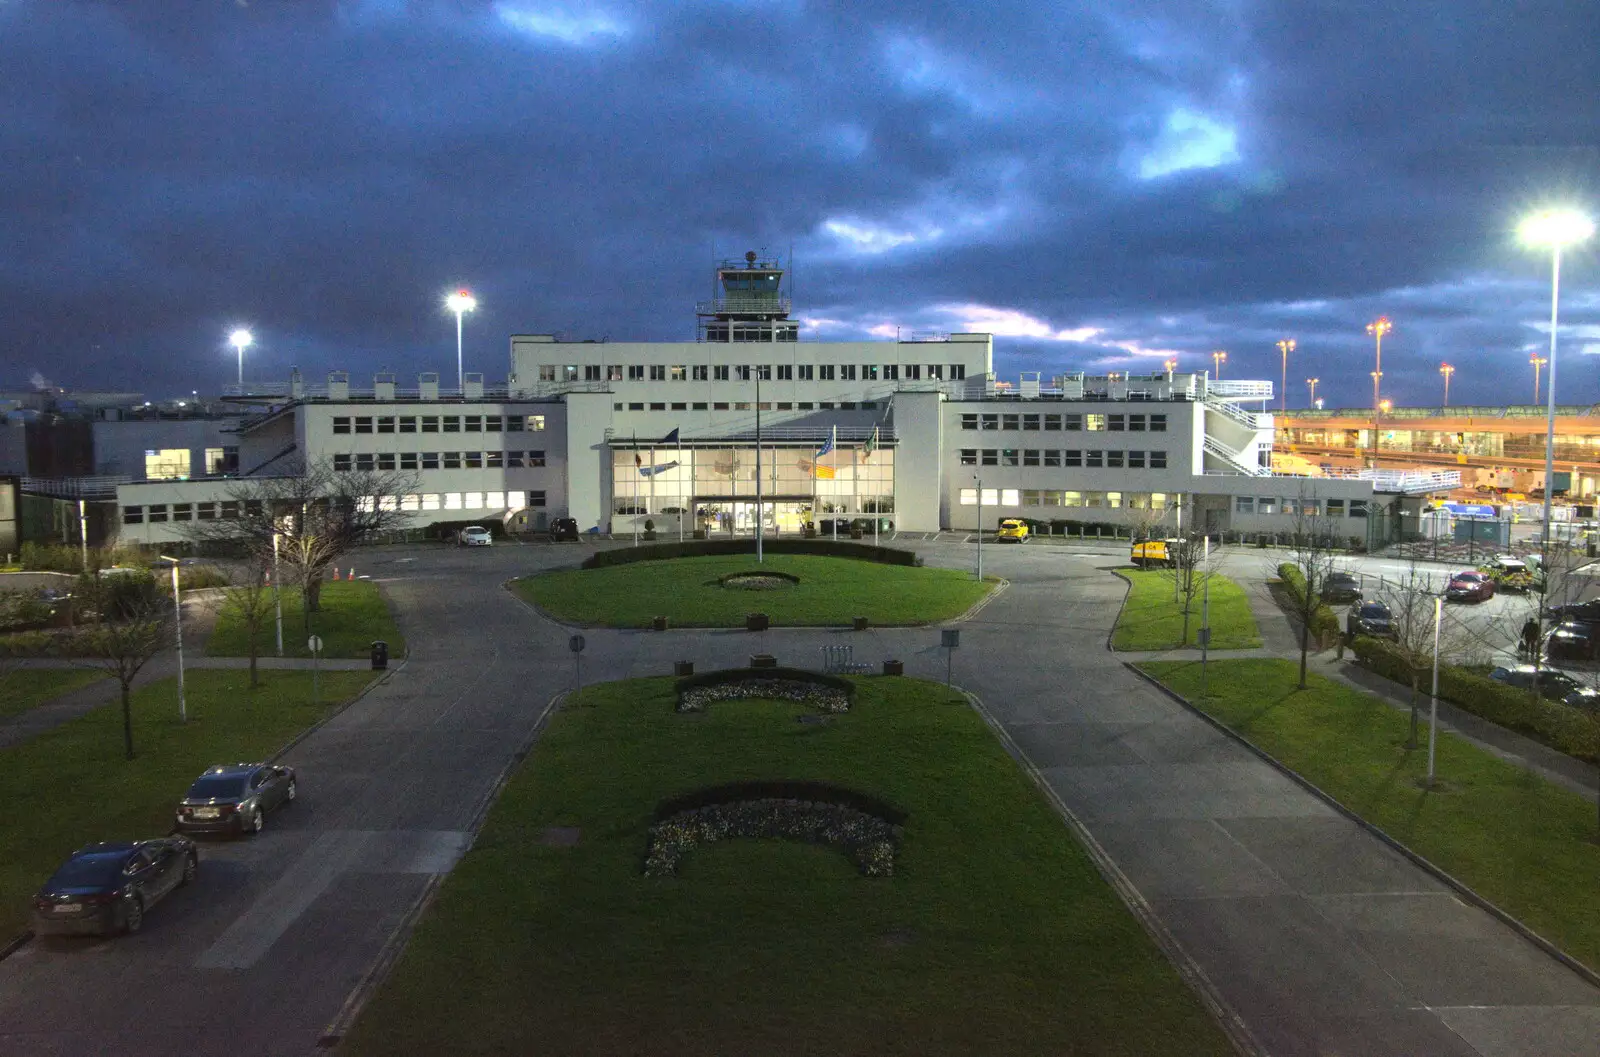 Dublin's old terminal and control tower, from The End of the Breffni, Blackrock, Dublin - 18th February 2023